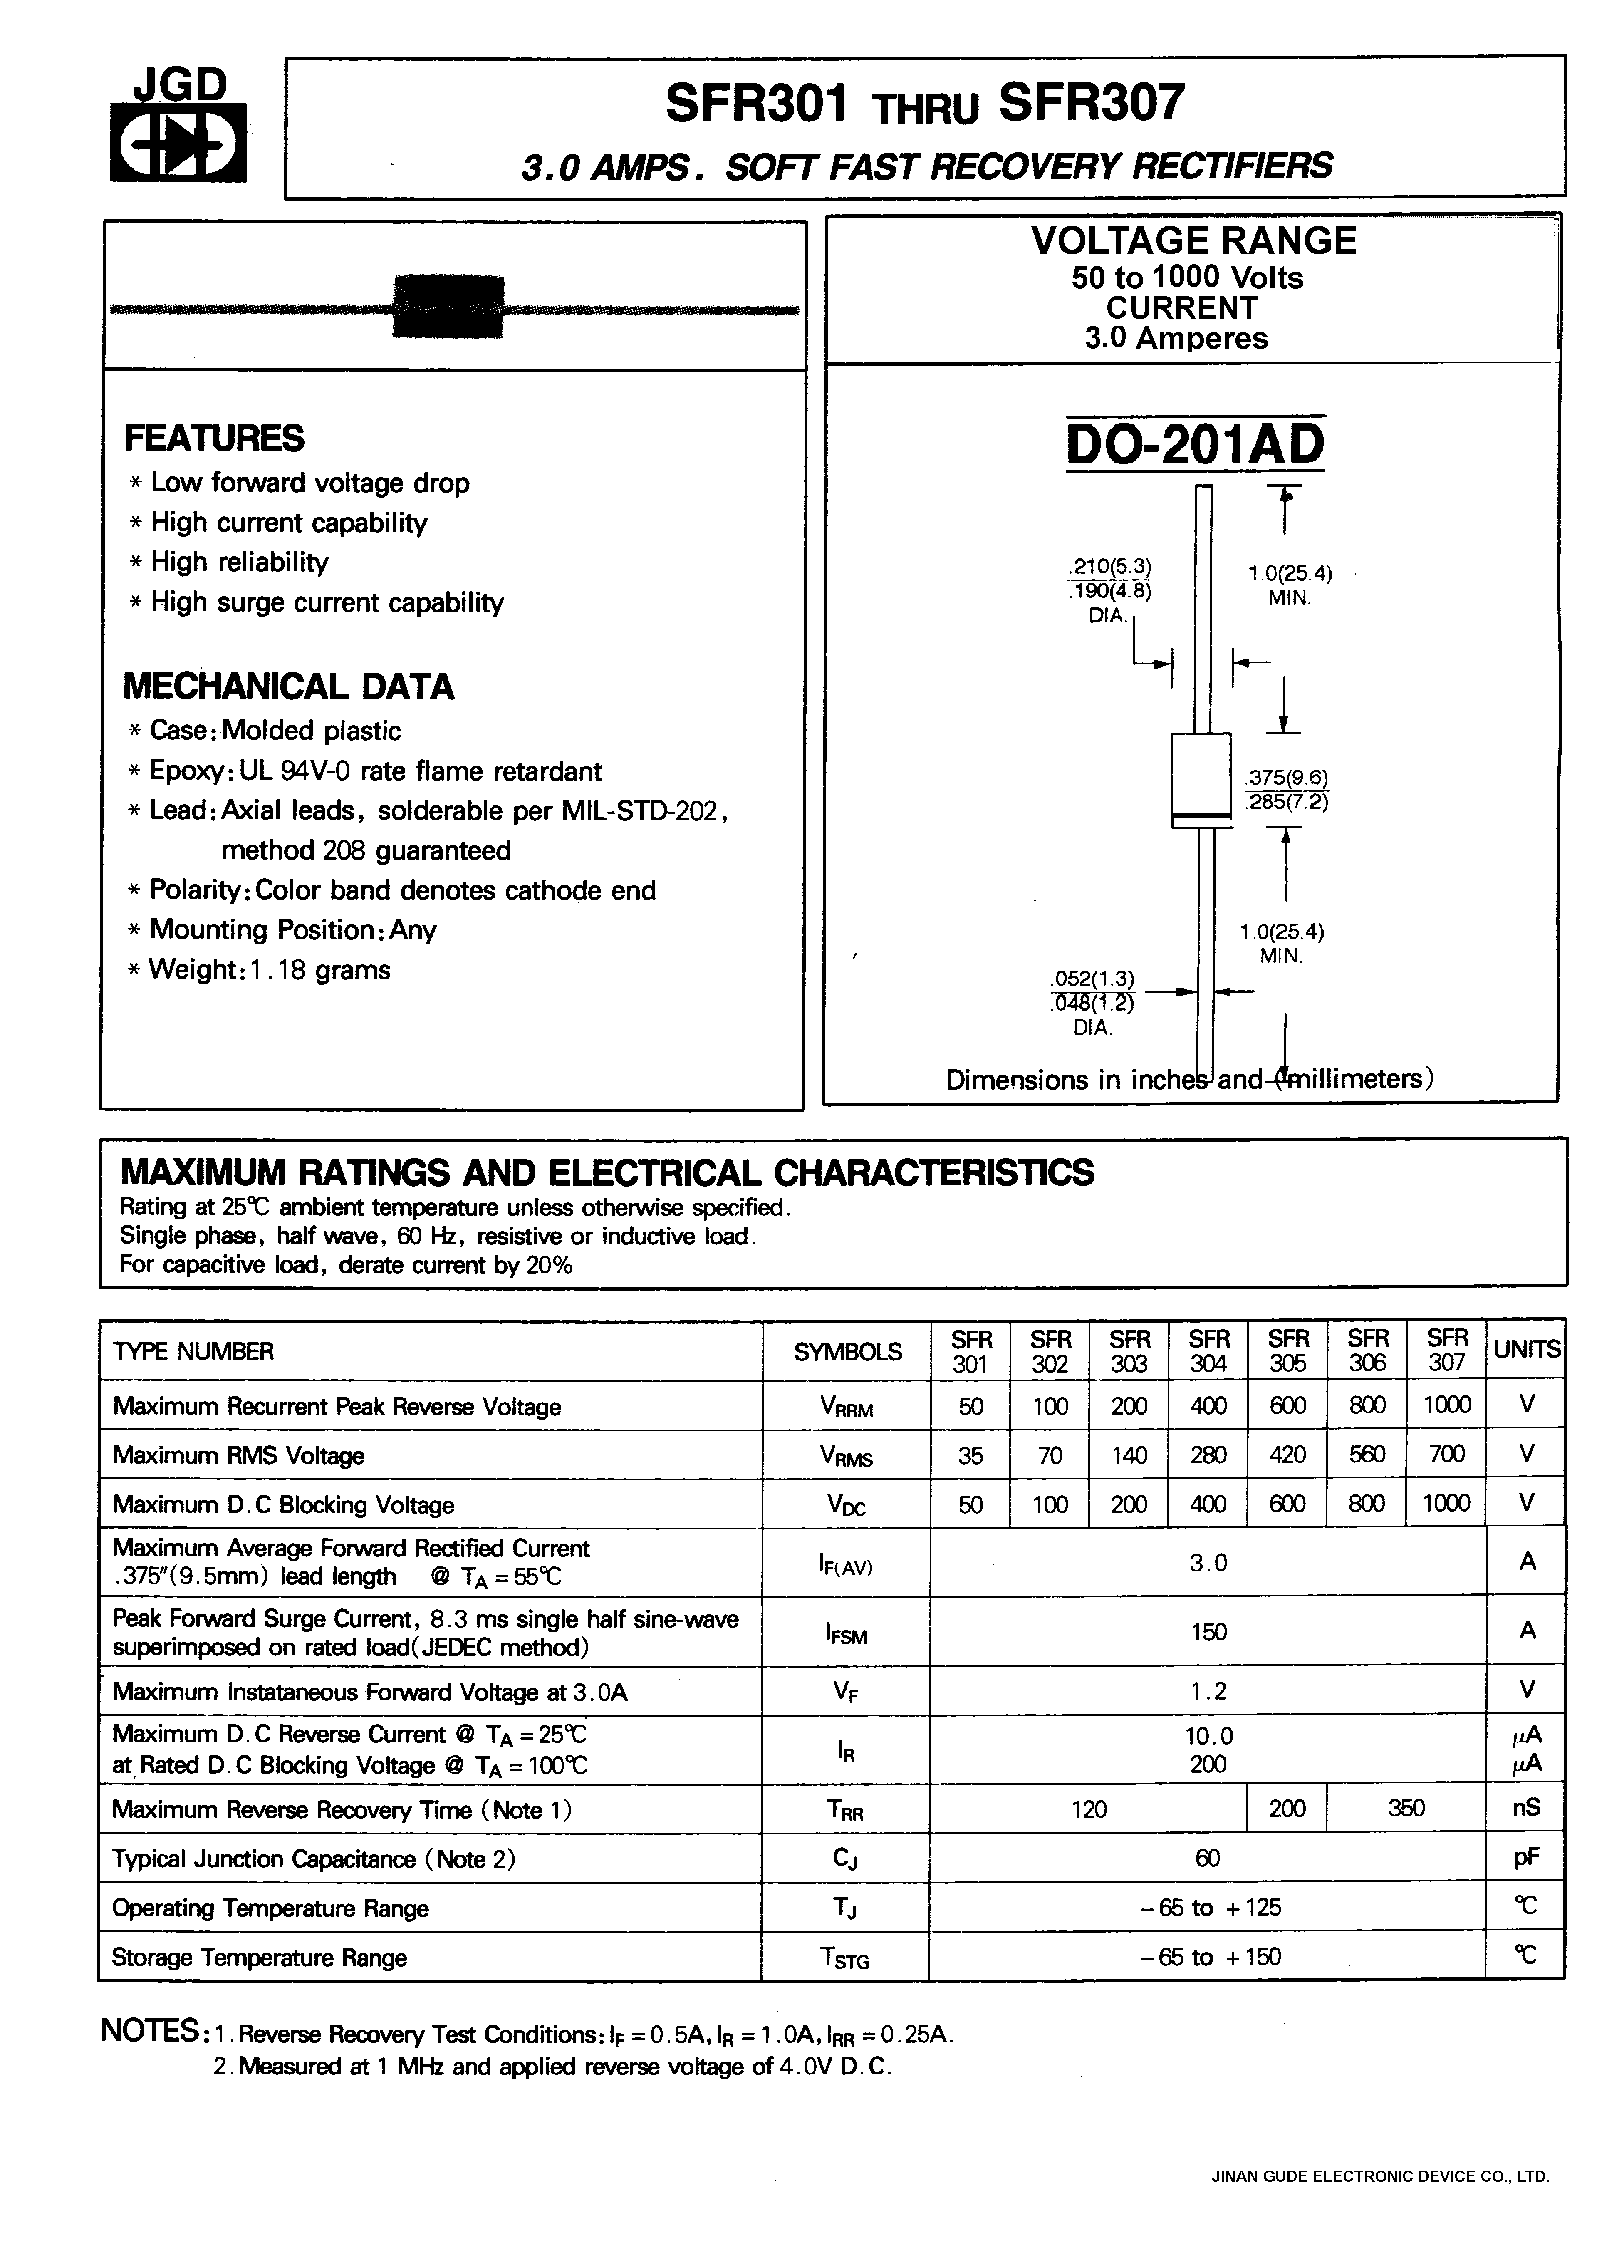 Datasheet SFR305 - 3.0 AMPS. SOFT FAST RECOVERY RECTIFIERS page 1